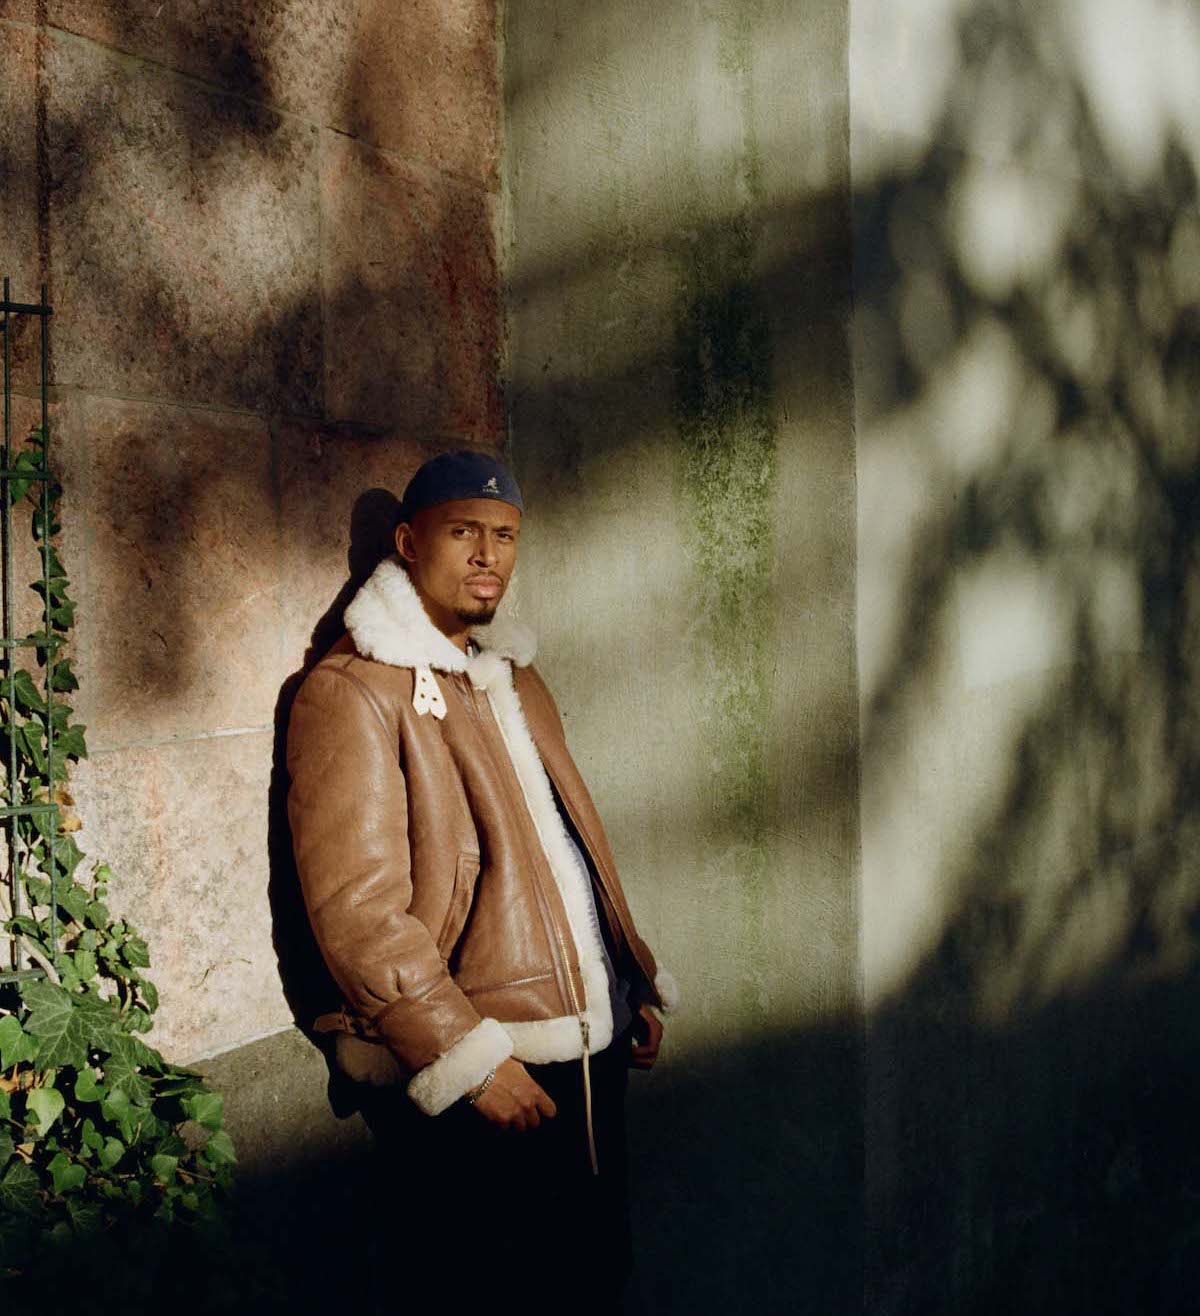 Black, young man with moustache and goatee, wears a blue-grey bonnet, a brown, thick leather jacket with fur collar and fur trim on the sleeves and waistband, his thumbs are in his trouser pockets. Ansu looks into the camera. He is leaning against a high stone wall with ivy growing on it. The sun is shining, shadows of a tree fall on the scene.